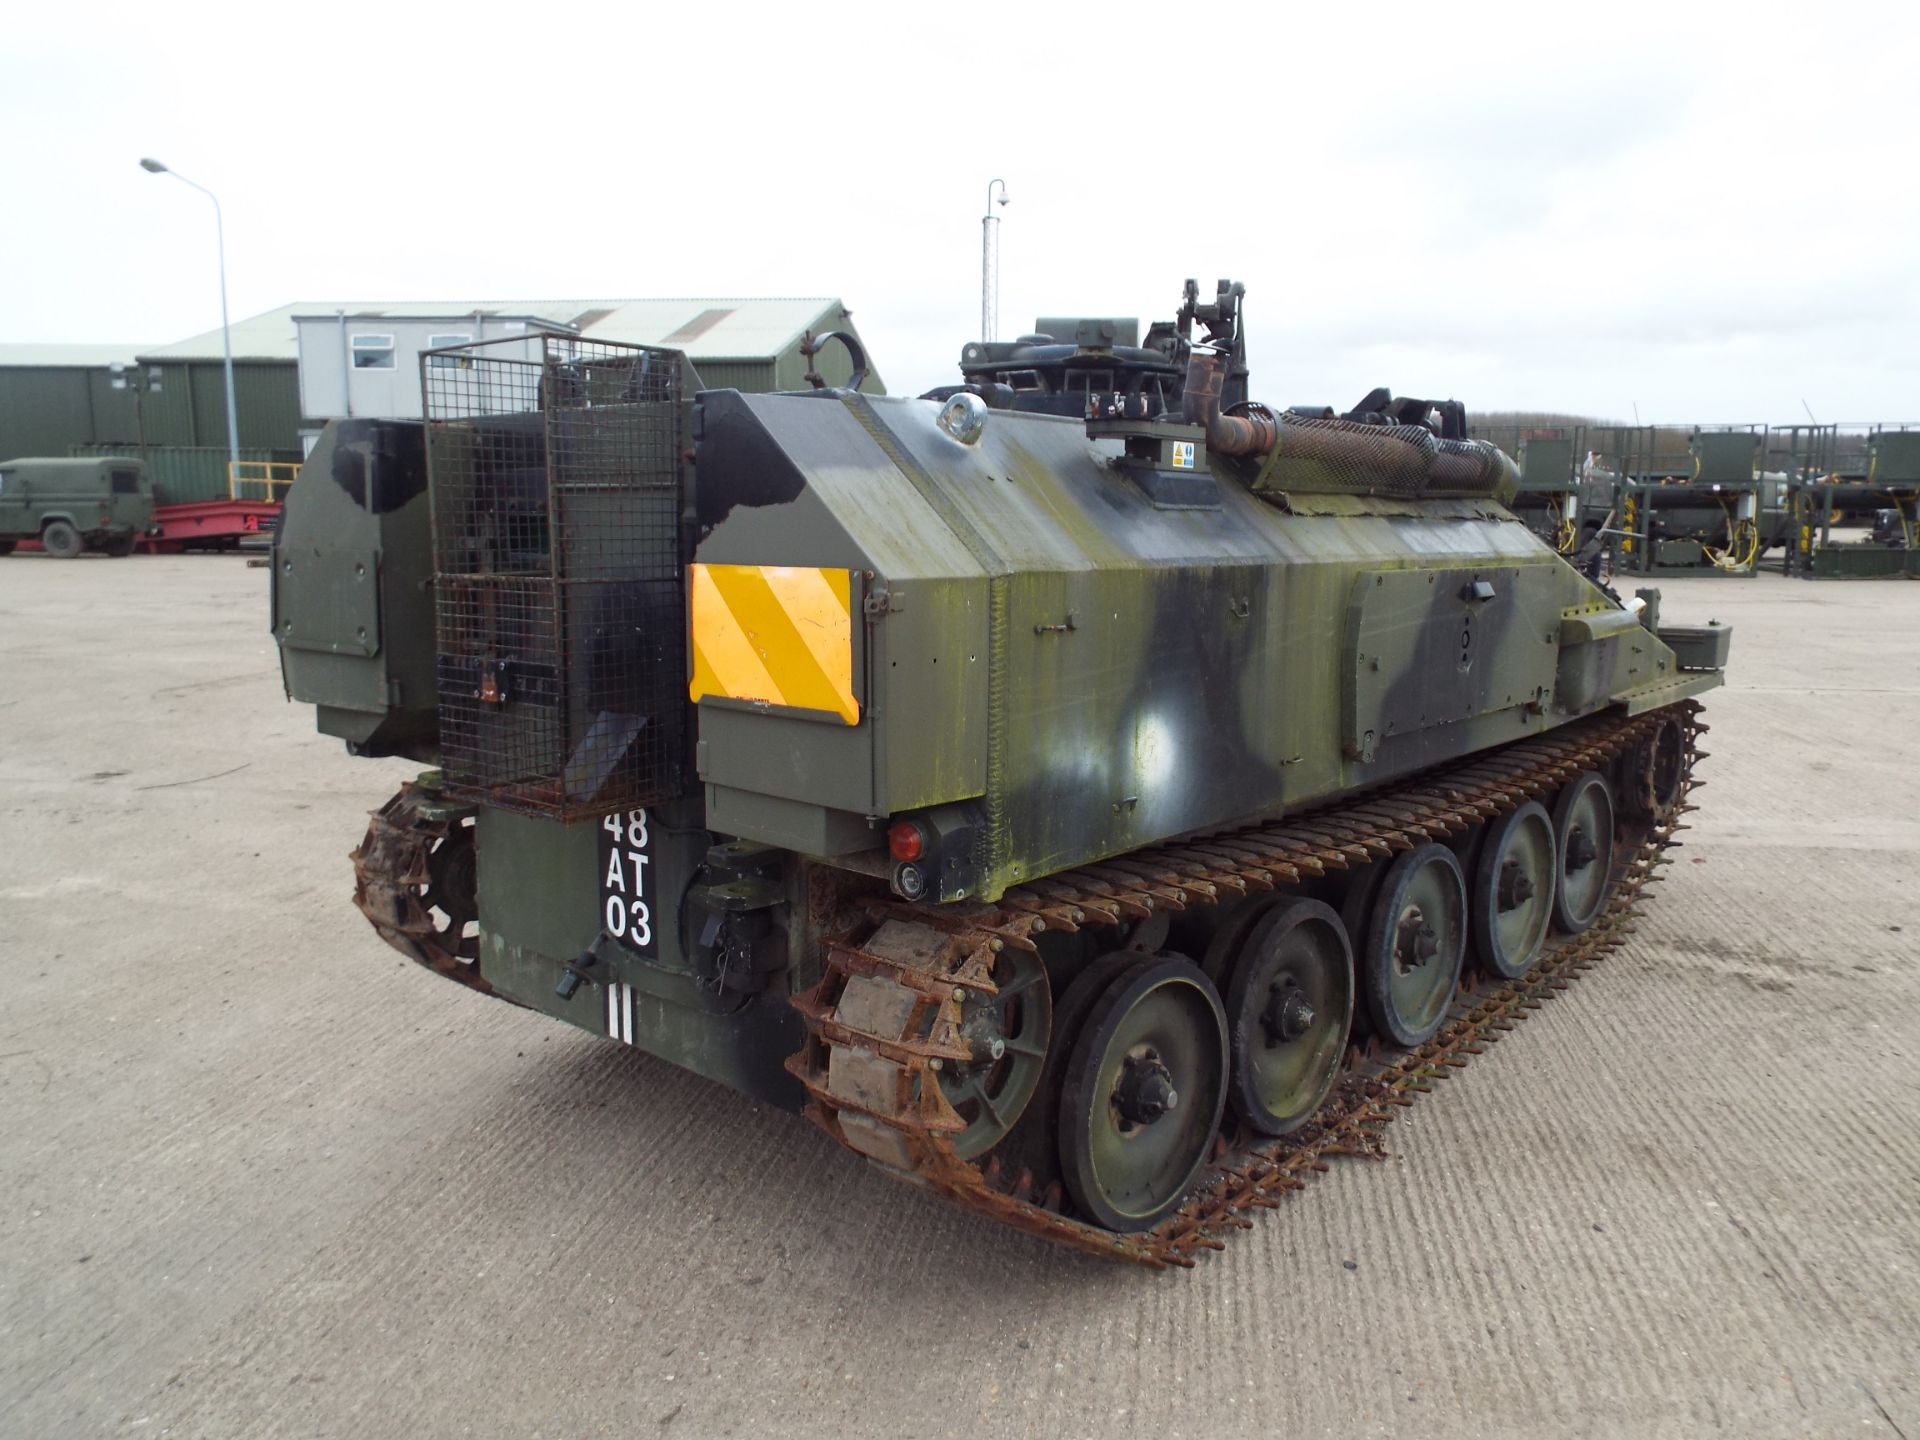 Dieselised CVRT (Combat Vehicle Reconnaissance Tracked) Spartan Armoured Personnel Carrier - Image 7 of 28